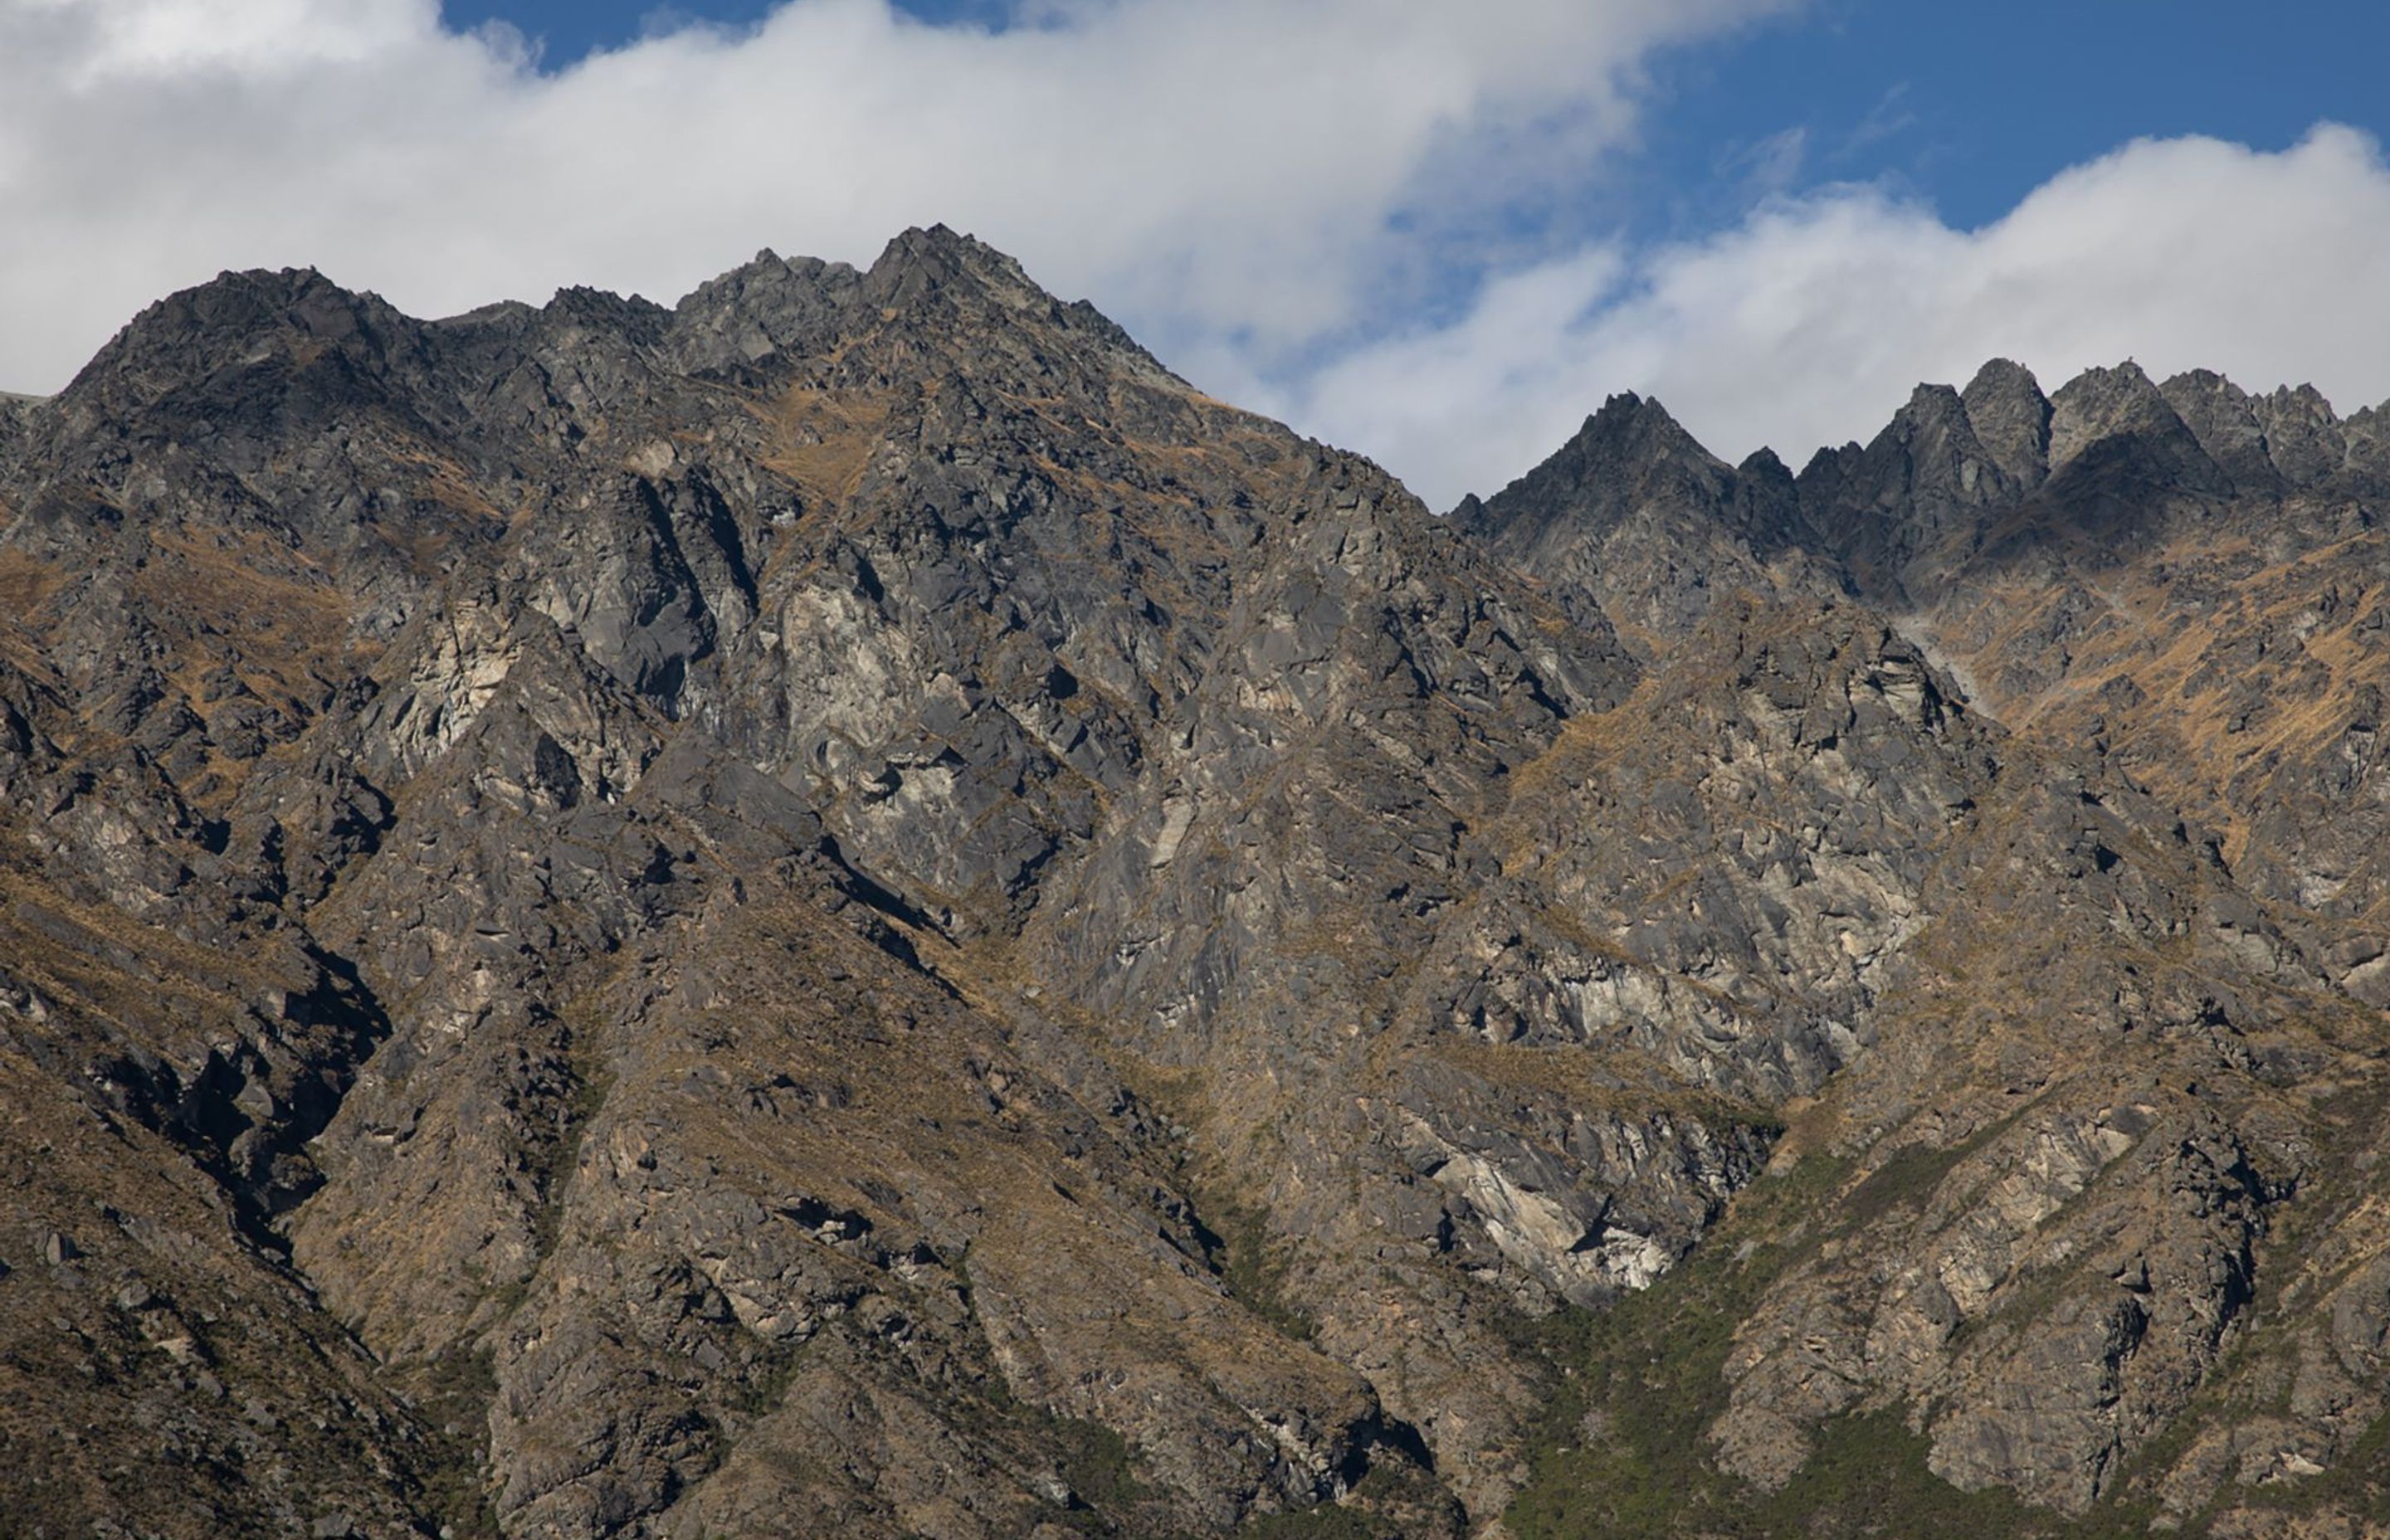 A view of The Remarkables mountain range during summer, without snow on its peaks.